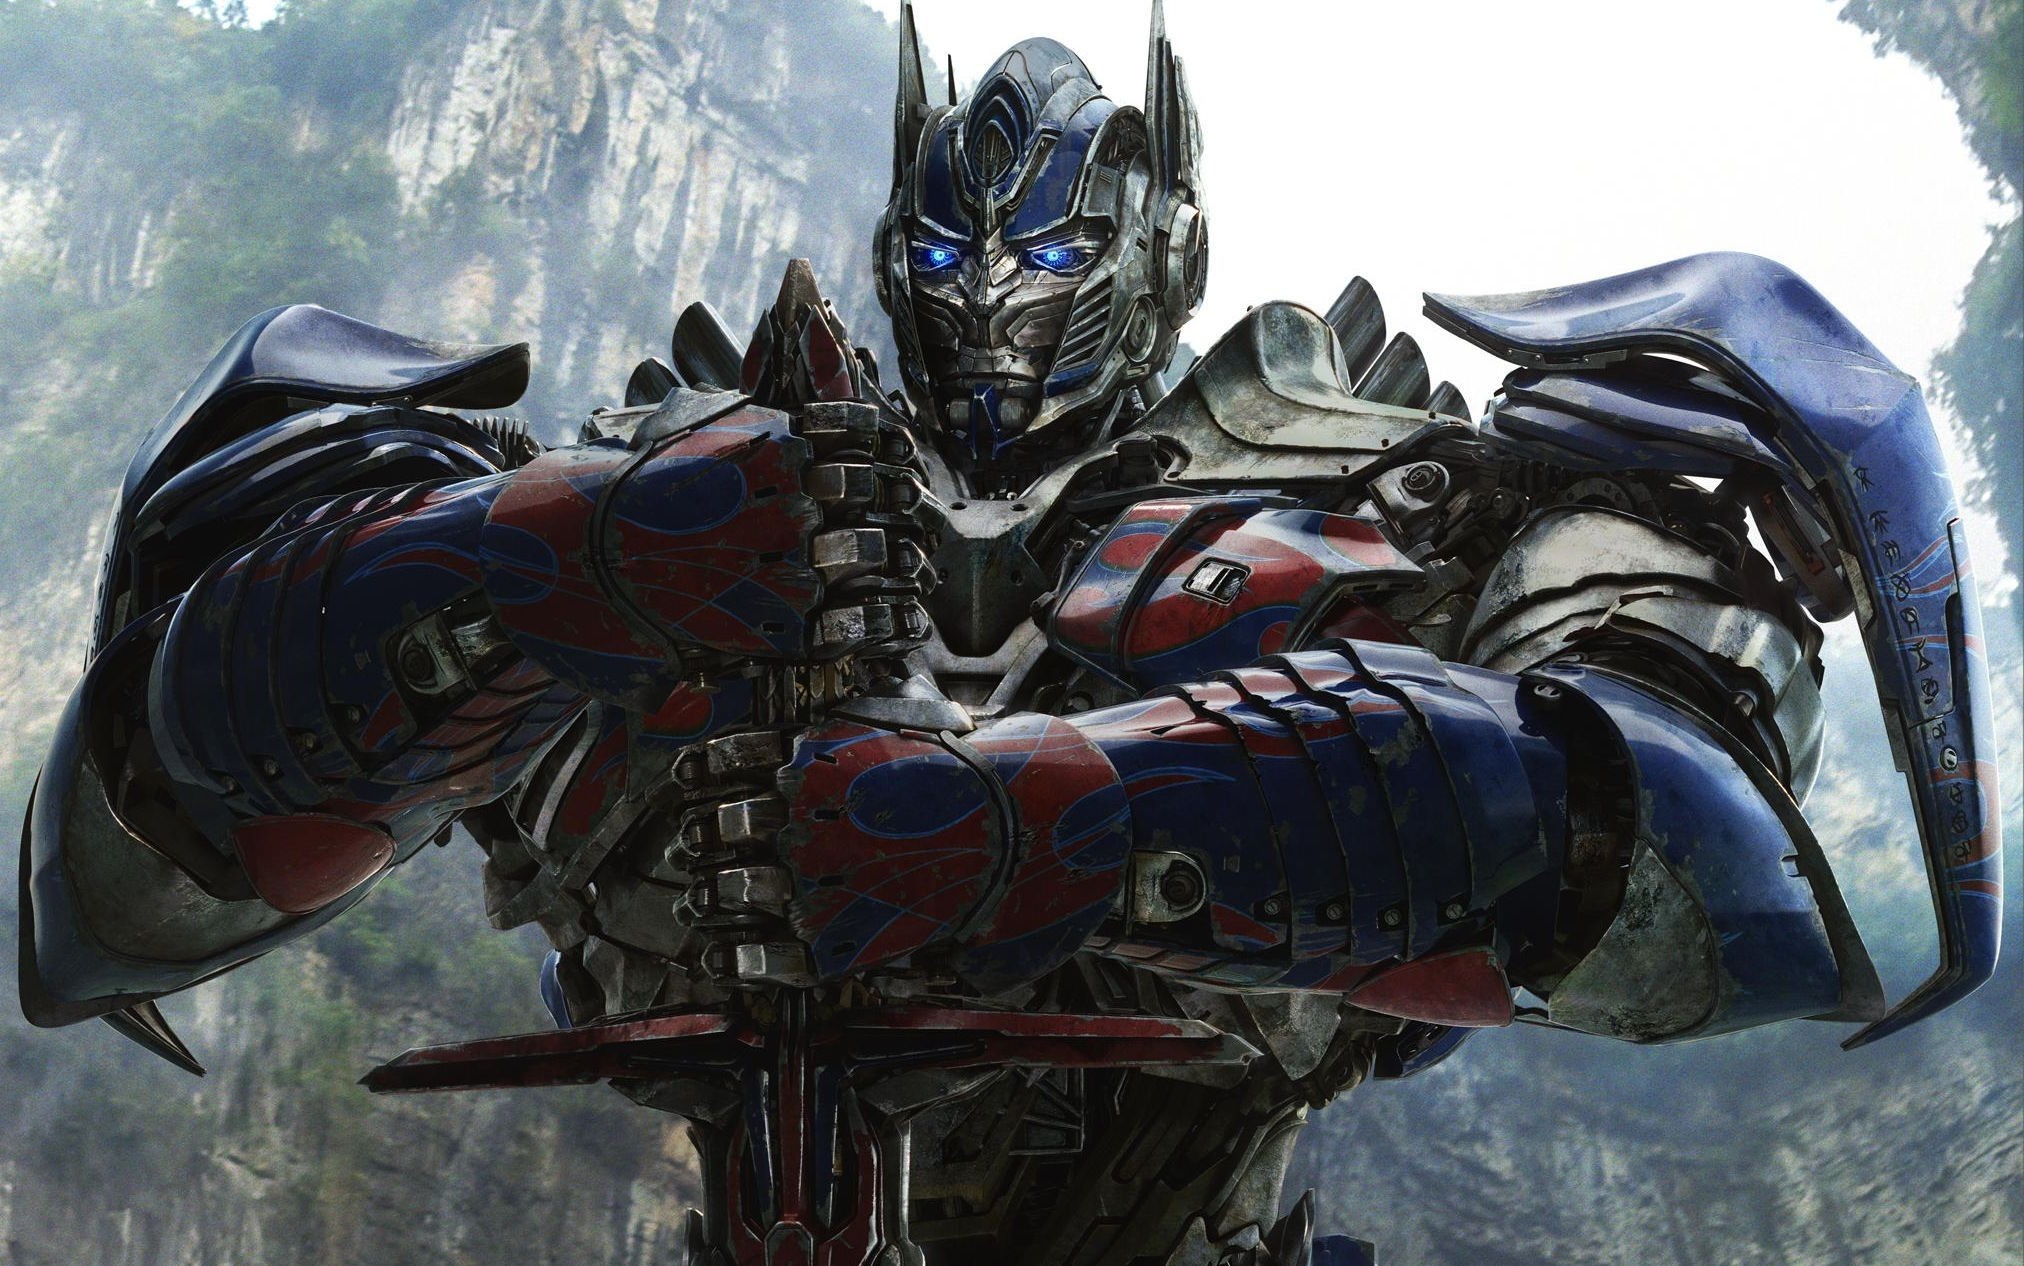 2024x1266 Optimus Prime, Transformers: Age Of Extinction, Movies, Transformers  Wallpapers HD / Desktop and Mobile Backgrounds